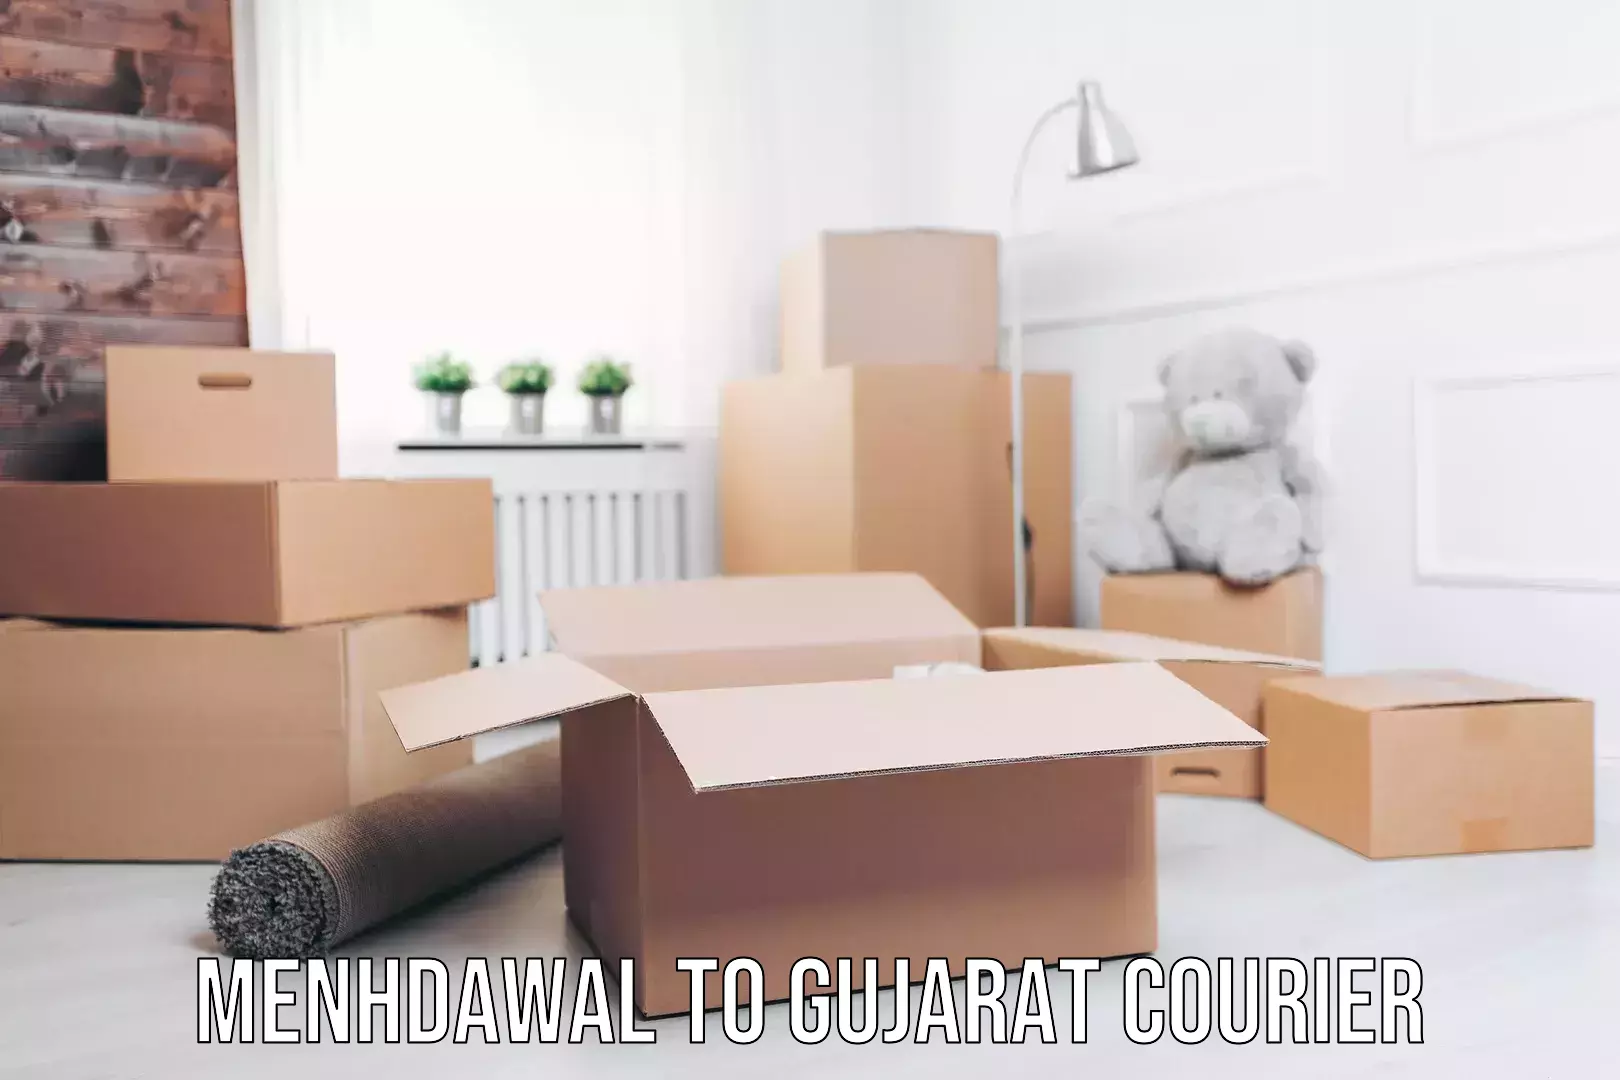 Professional moving assistance Menhdawal to Gujarat